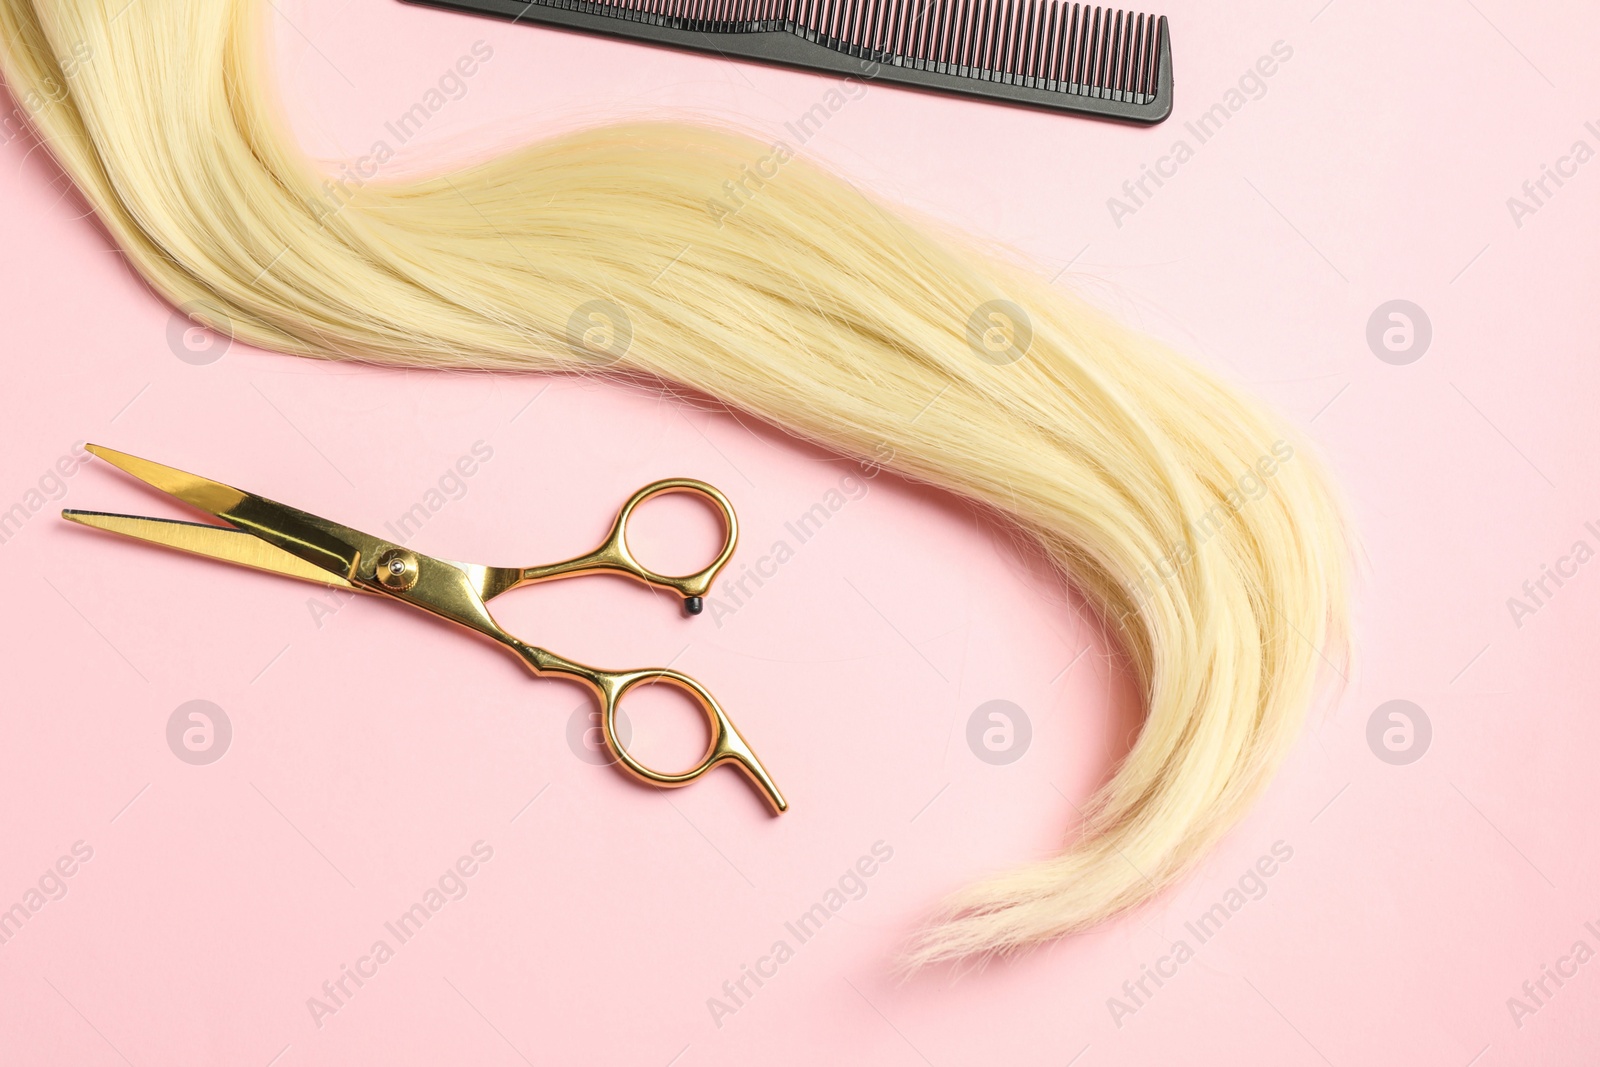 Photo of Professional hairdresser scissors and comb with blonde hair strand on pink background, top view